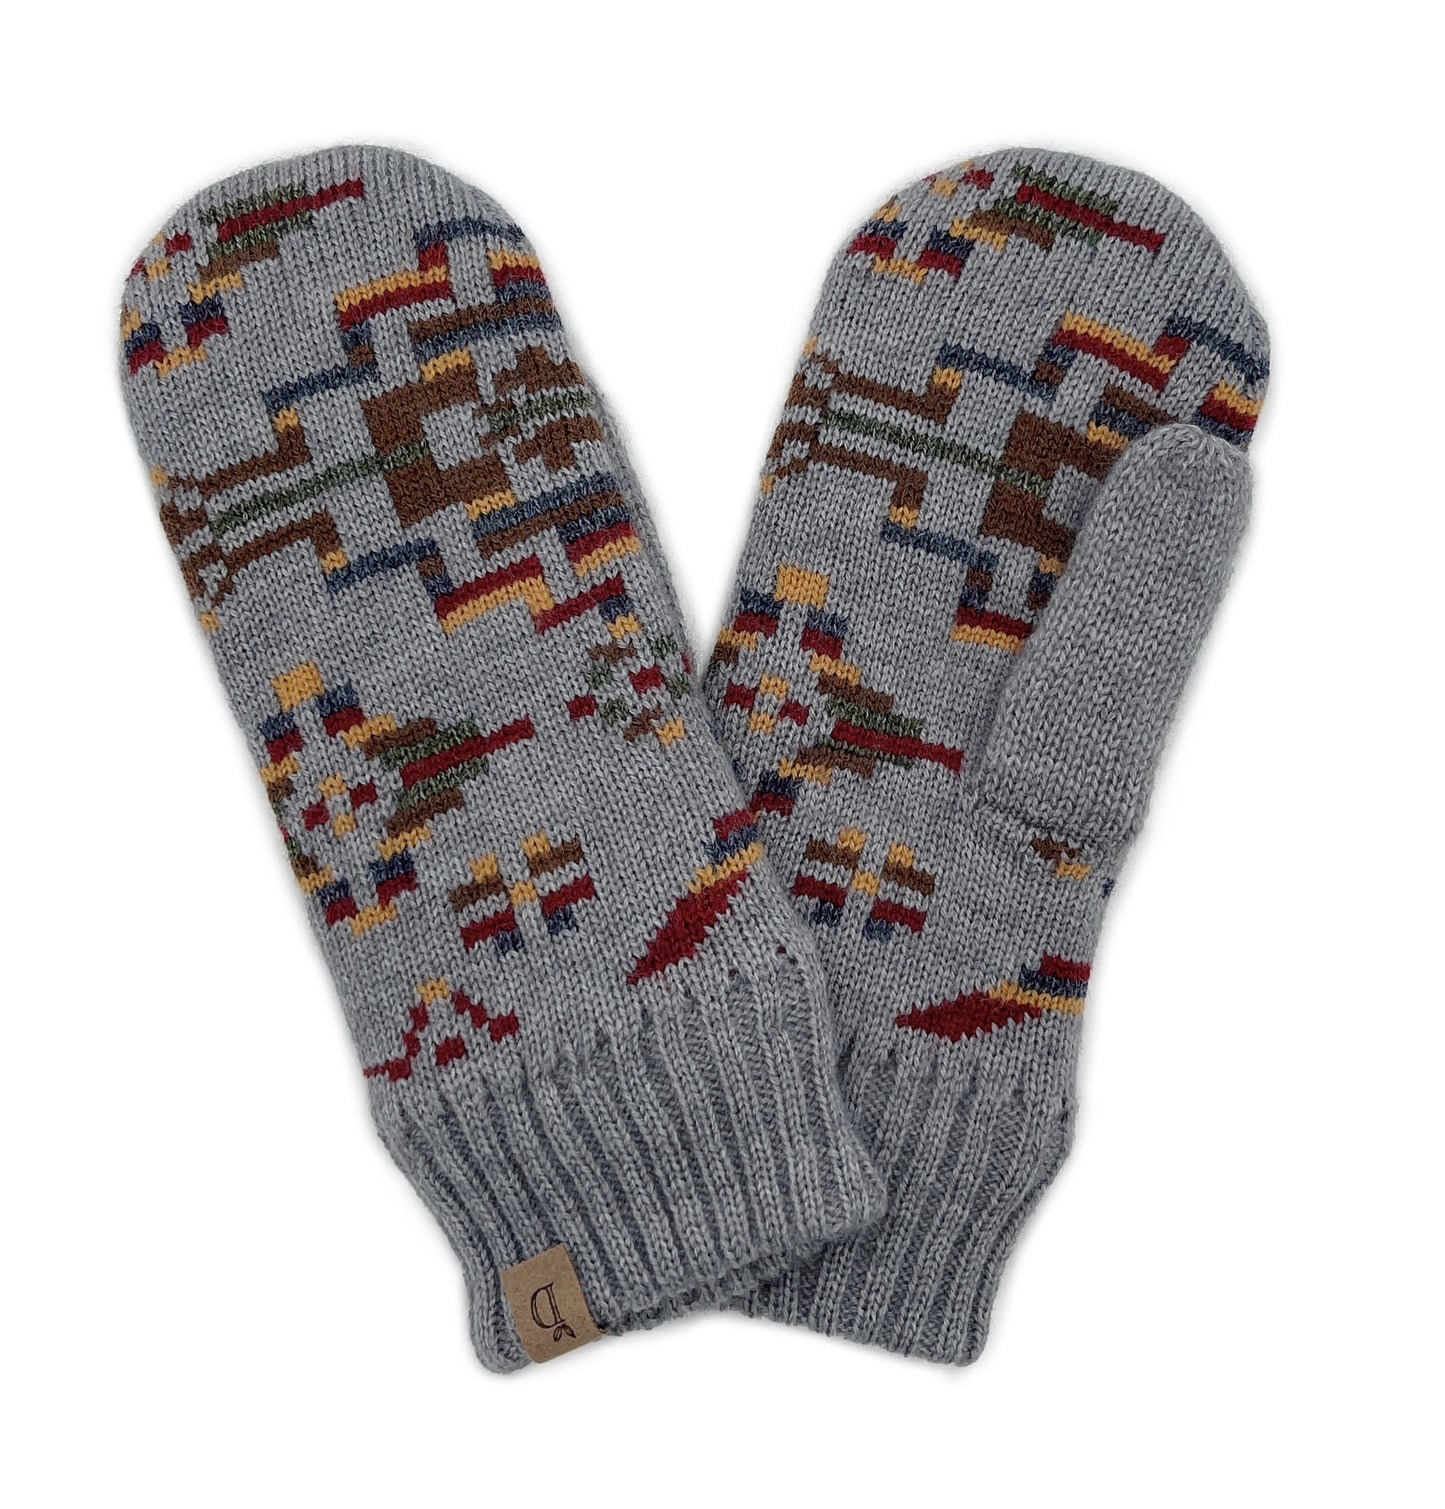 Shop for KW Fashion Aztec Mittens With Ribbed Cuff at doeverythinginloveny.com wholesale fashion accessories